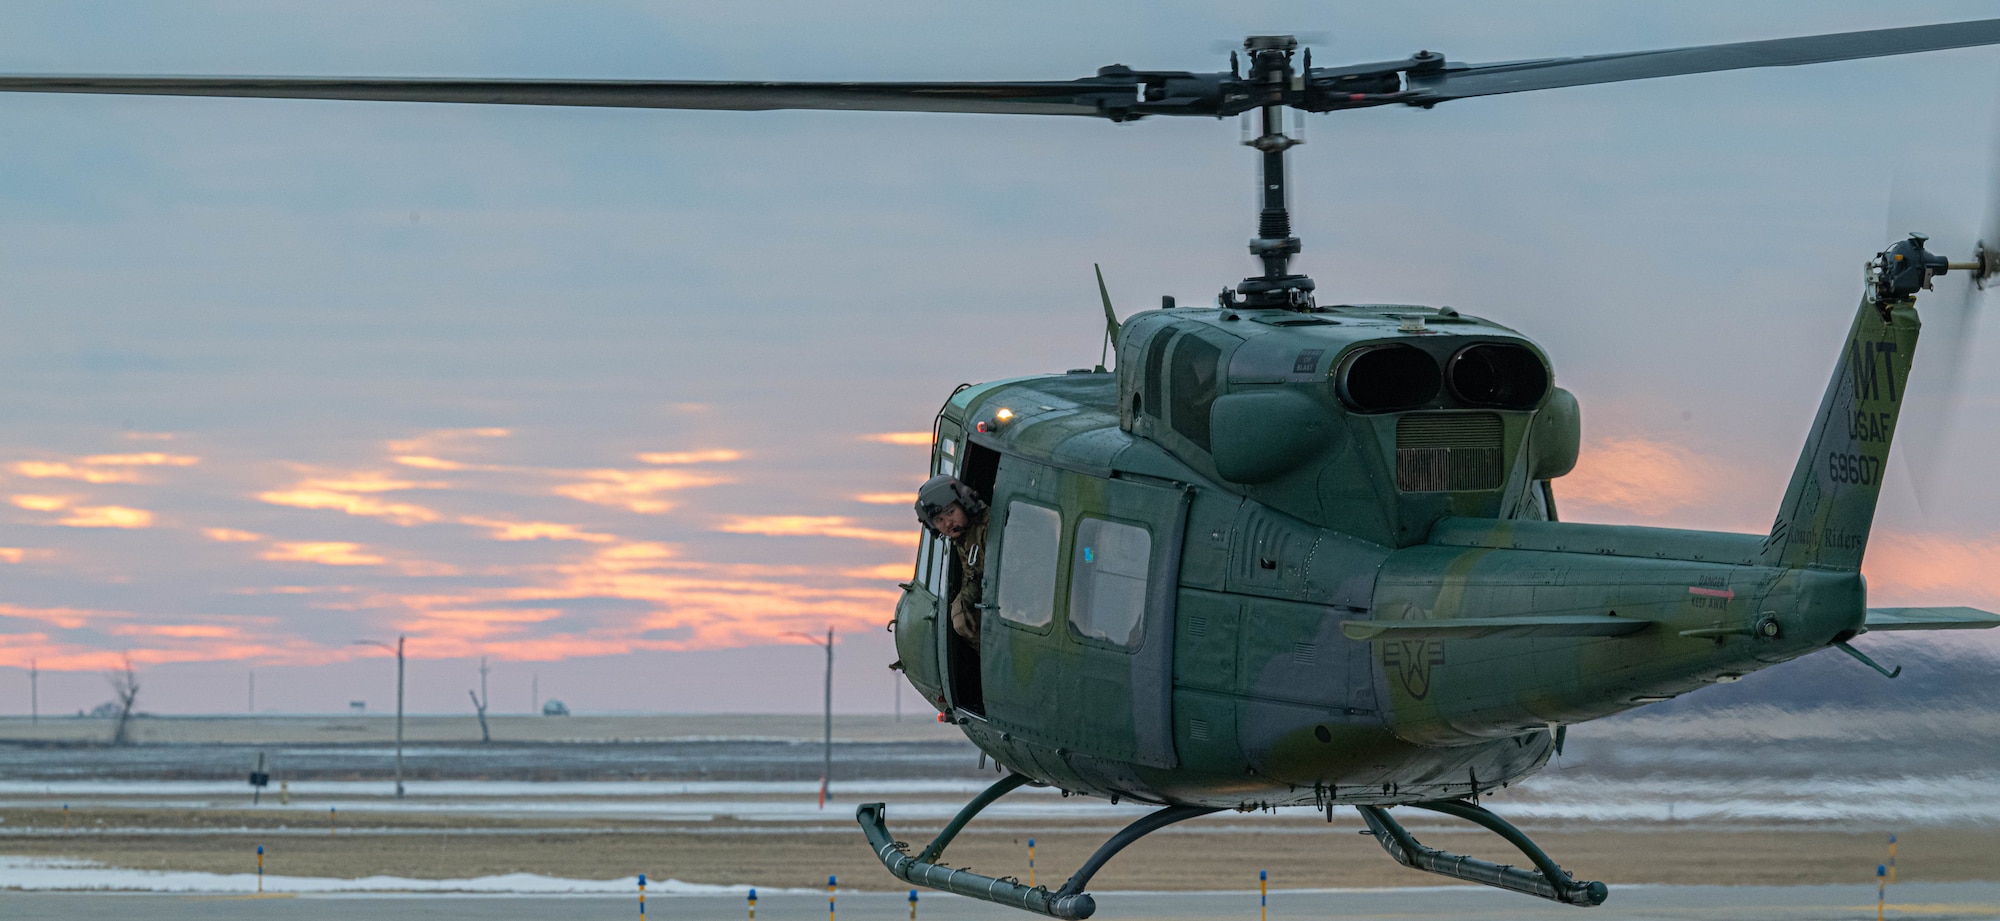 A U.S. Air Force UH-1N Iroquois, assigned to the 54th Helicopter Squadron, takes off at Minot Air Force Base, North Dakota, Dec. 20, 2023. The UH-1N is a light-lift utility helicopter used to support a wide variety of missions. (U.S. Air Force photo by Airman 1st Class Kyle Wilson)